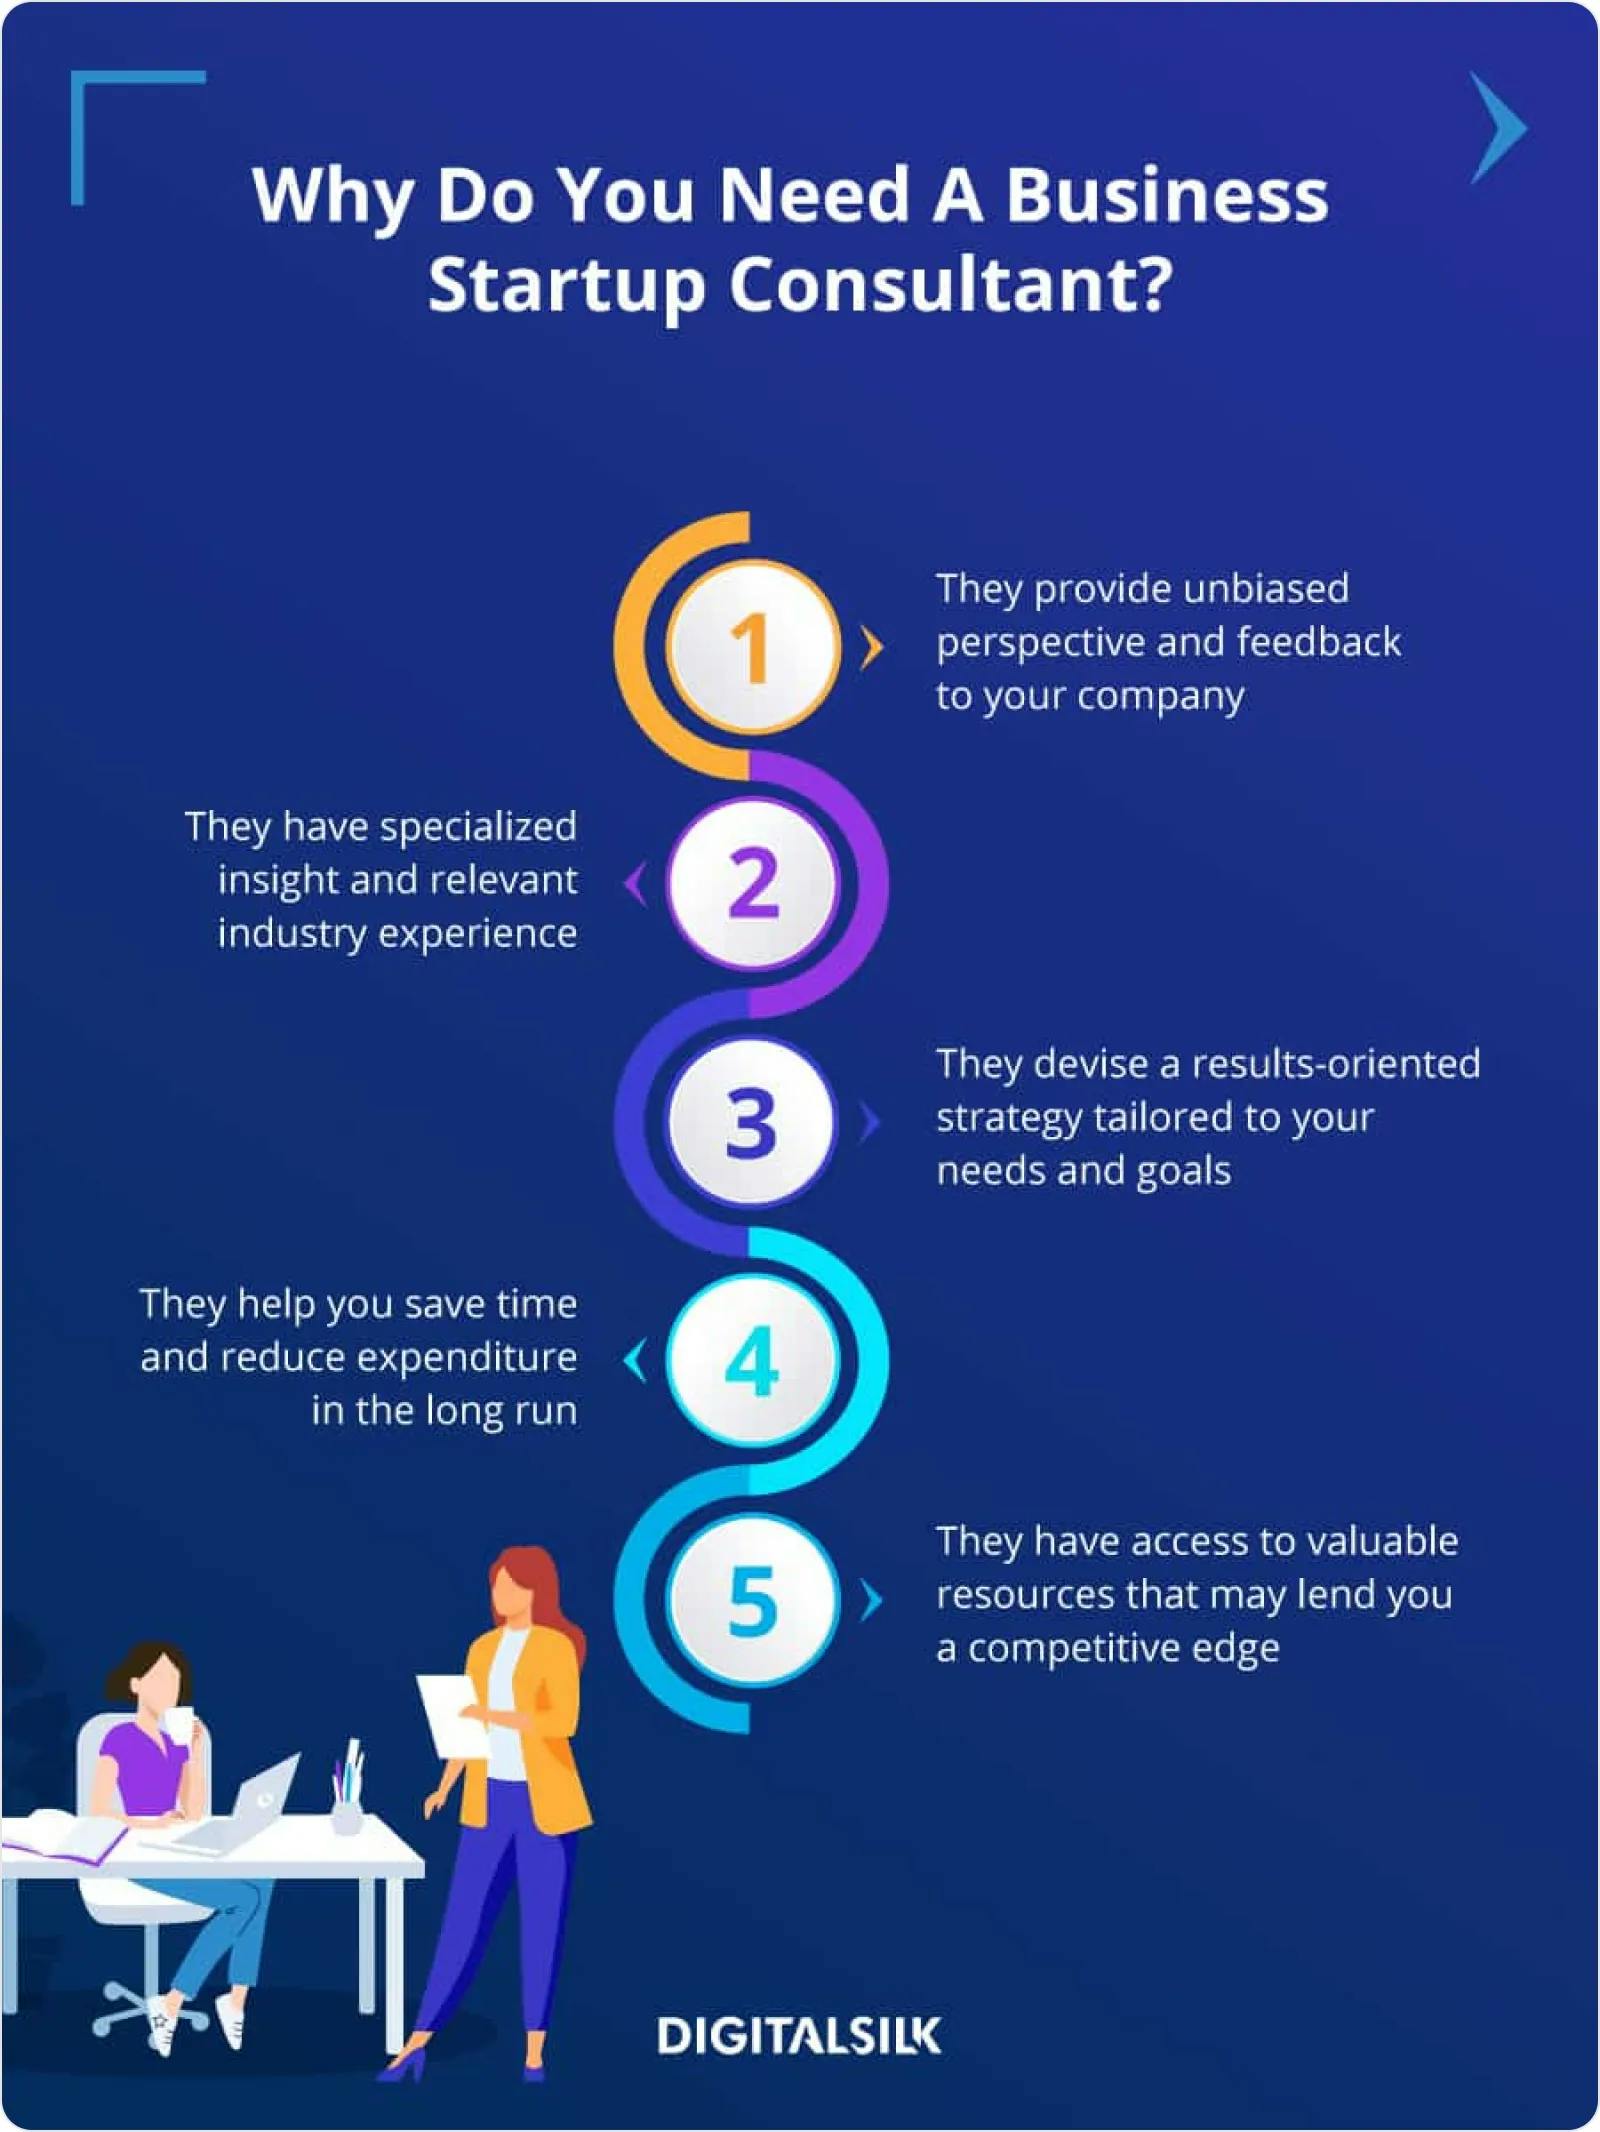 Why do you need a business startup consutlant?